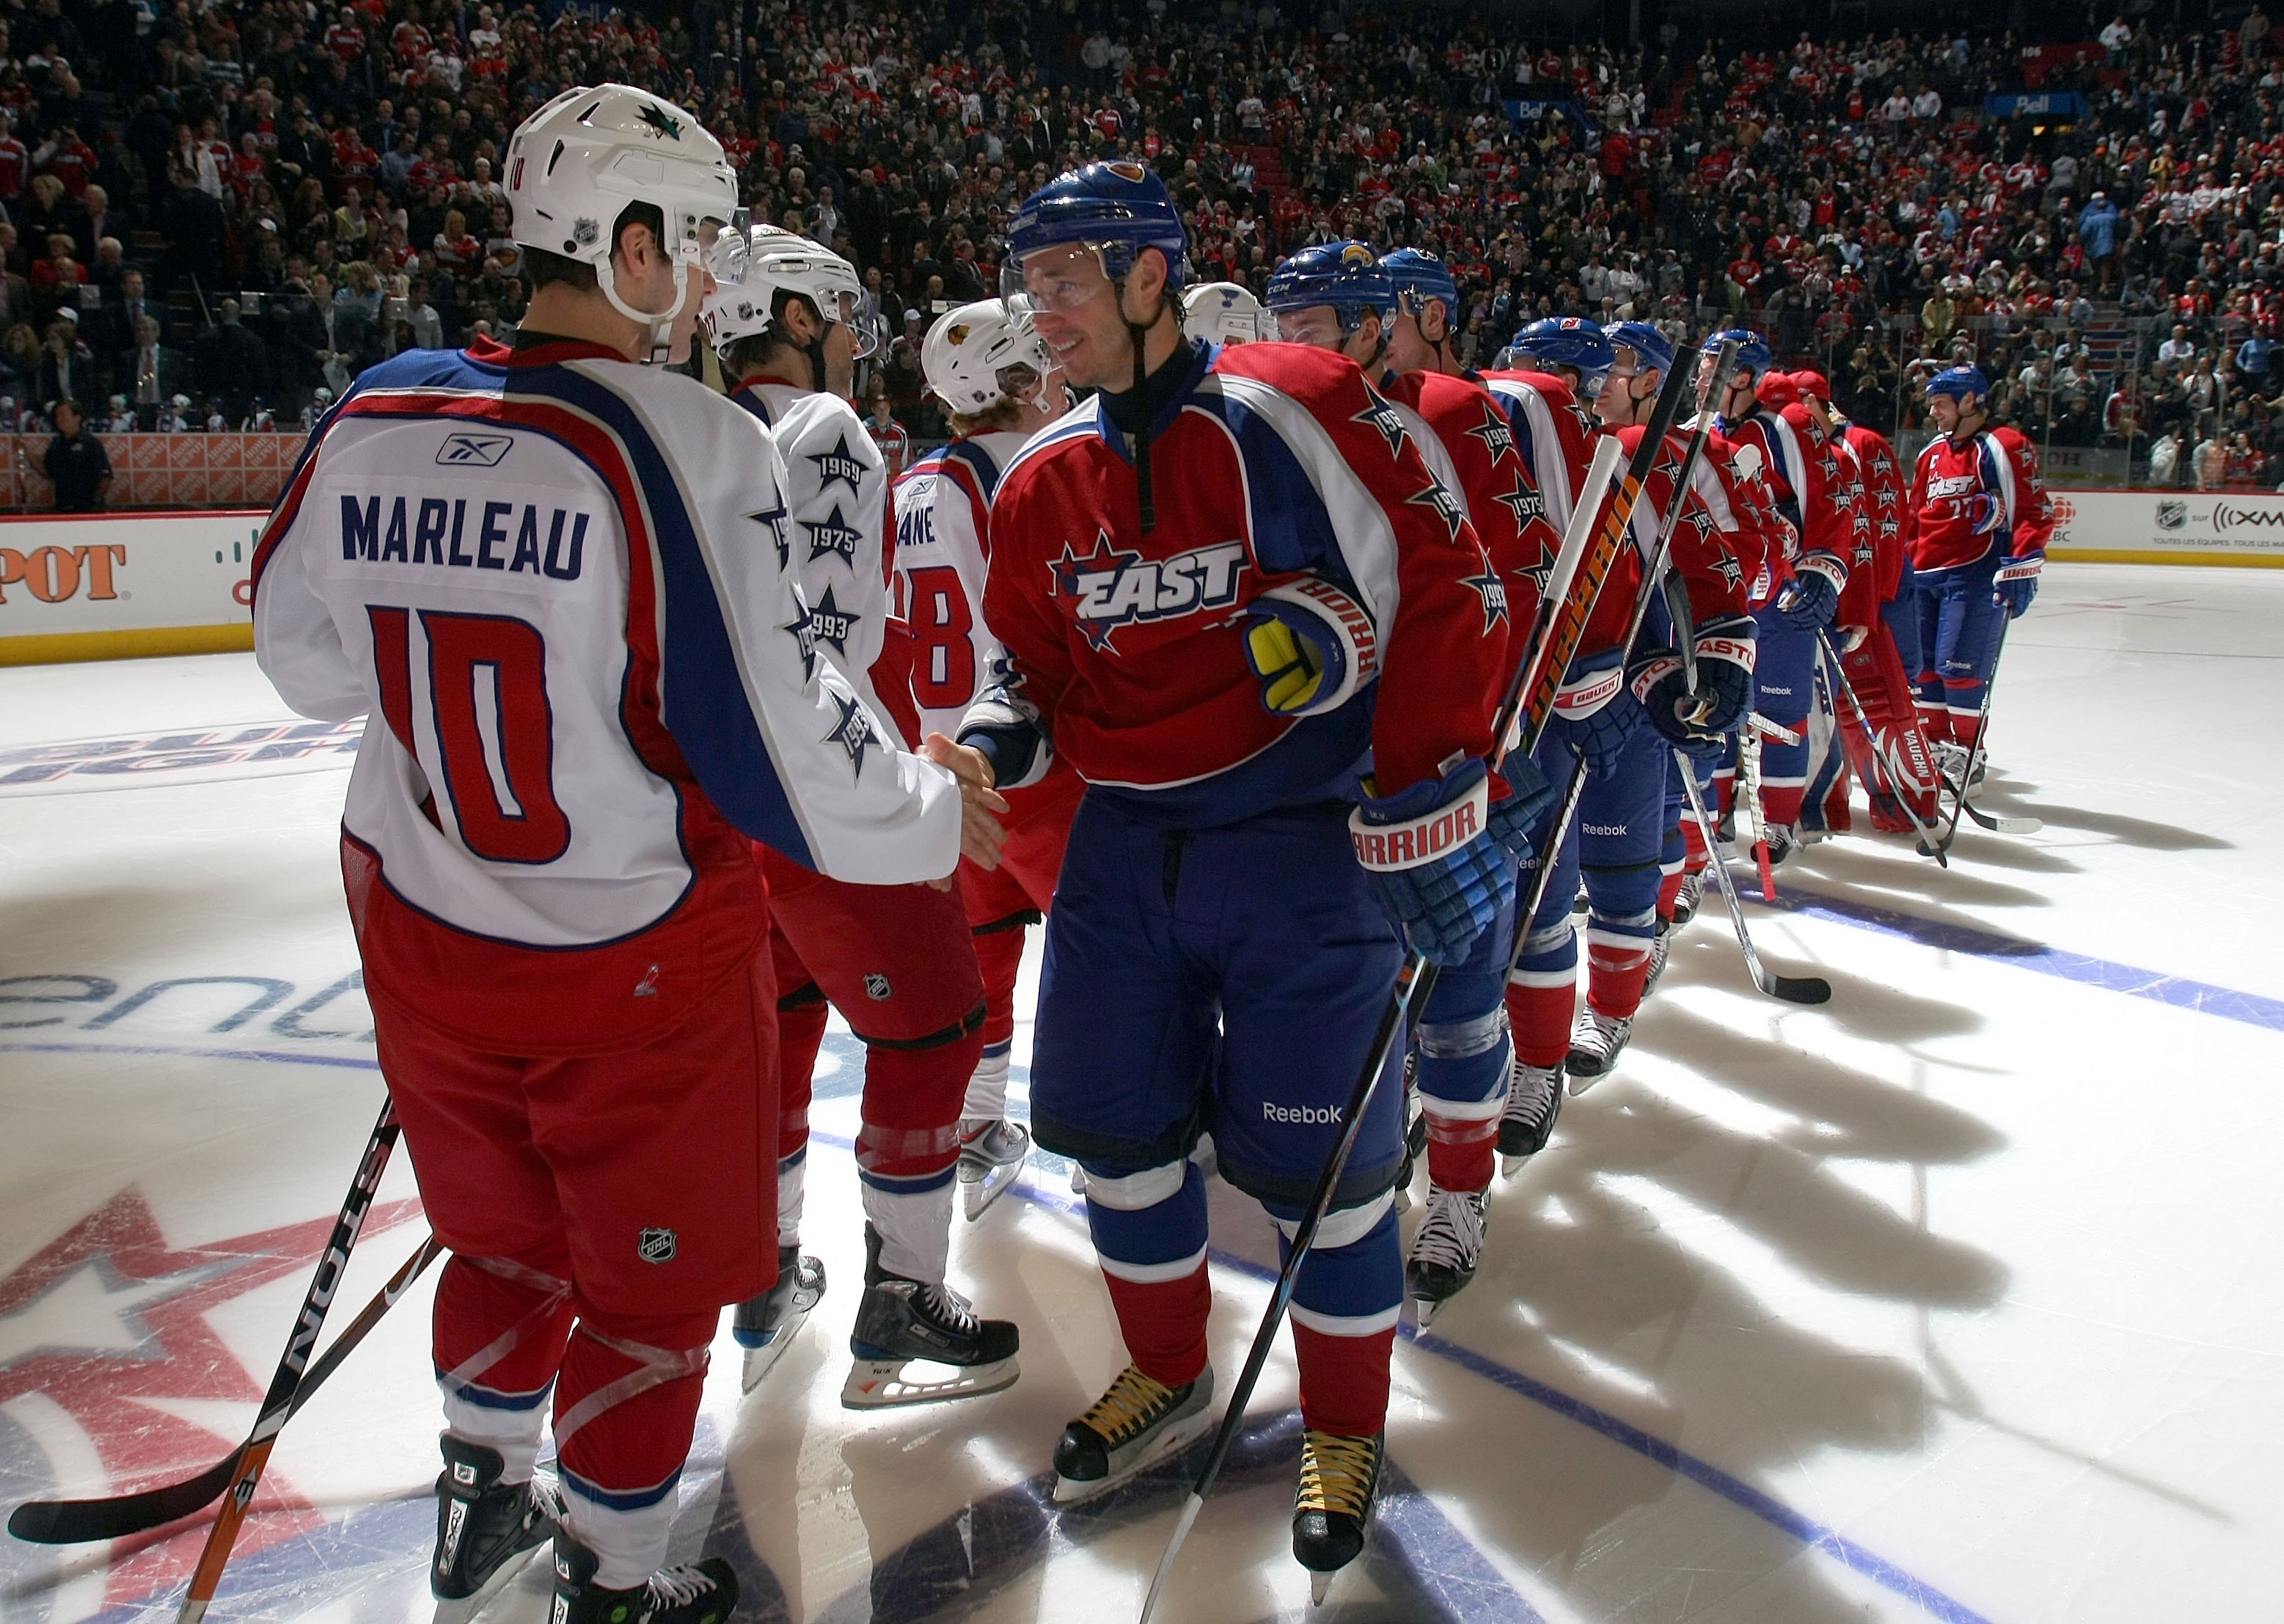 2011 NHL All-Star Game: Predicting the Top 12 Selections